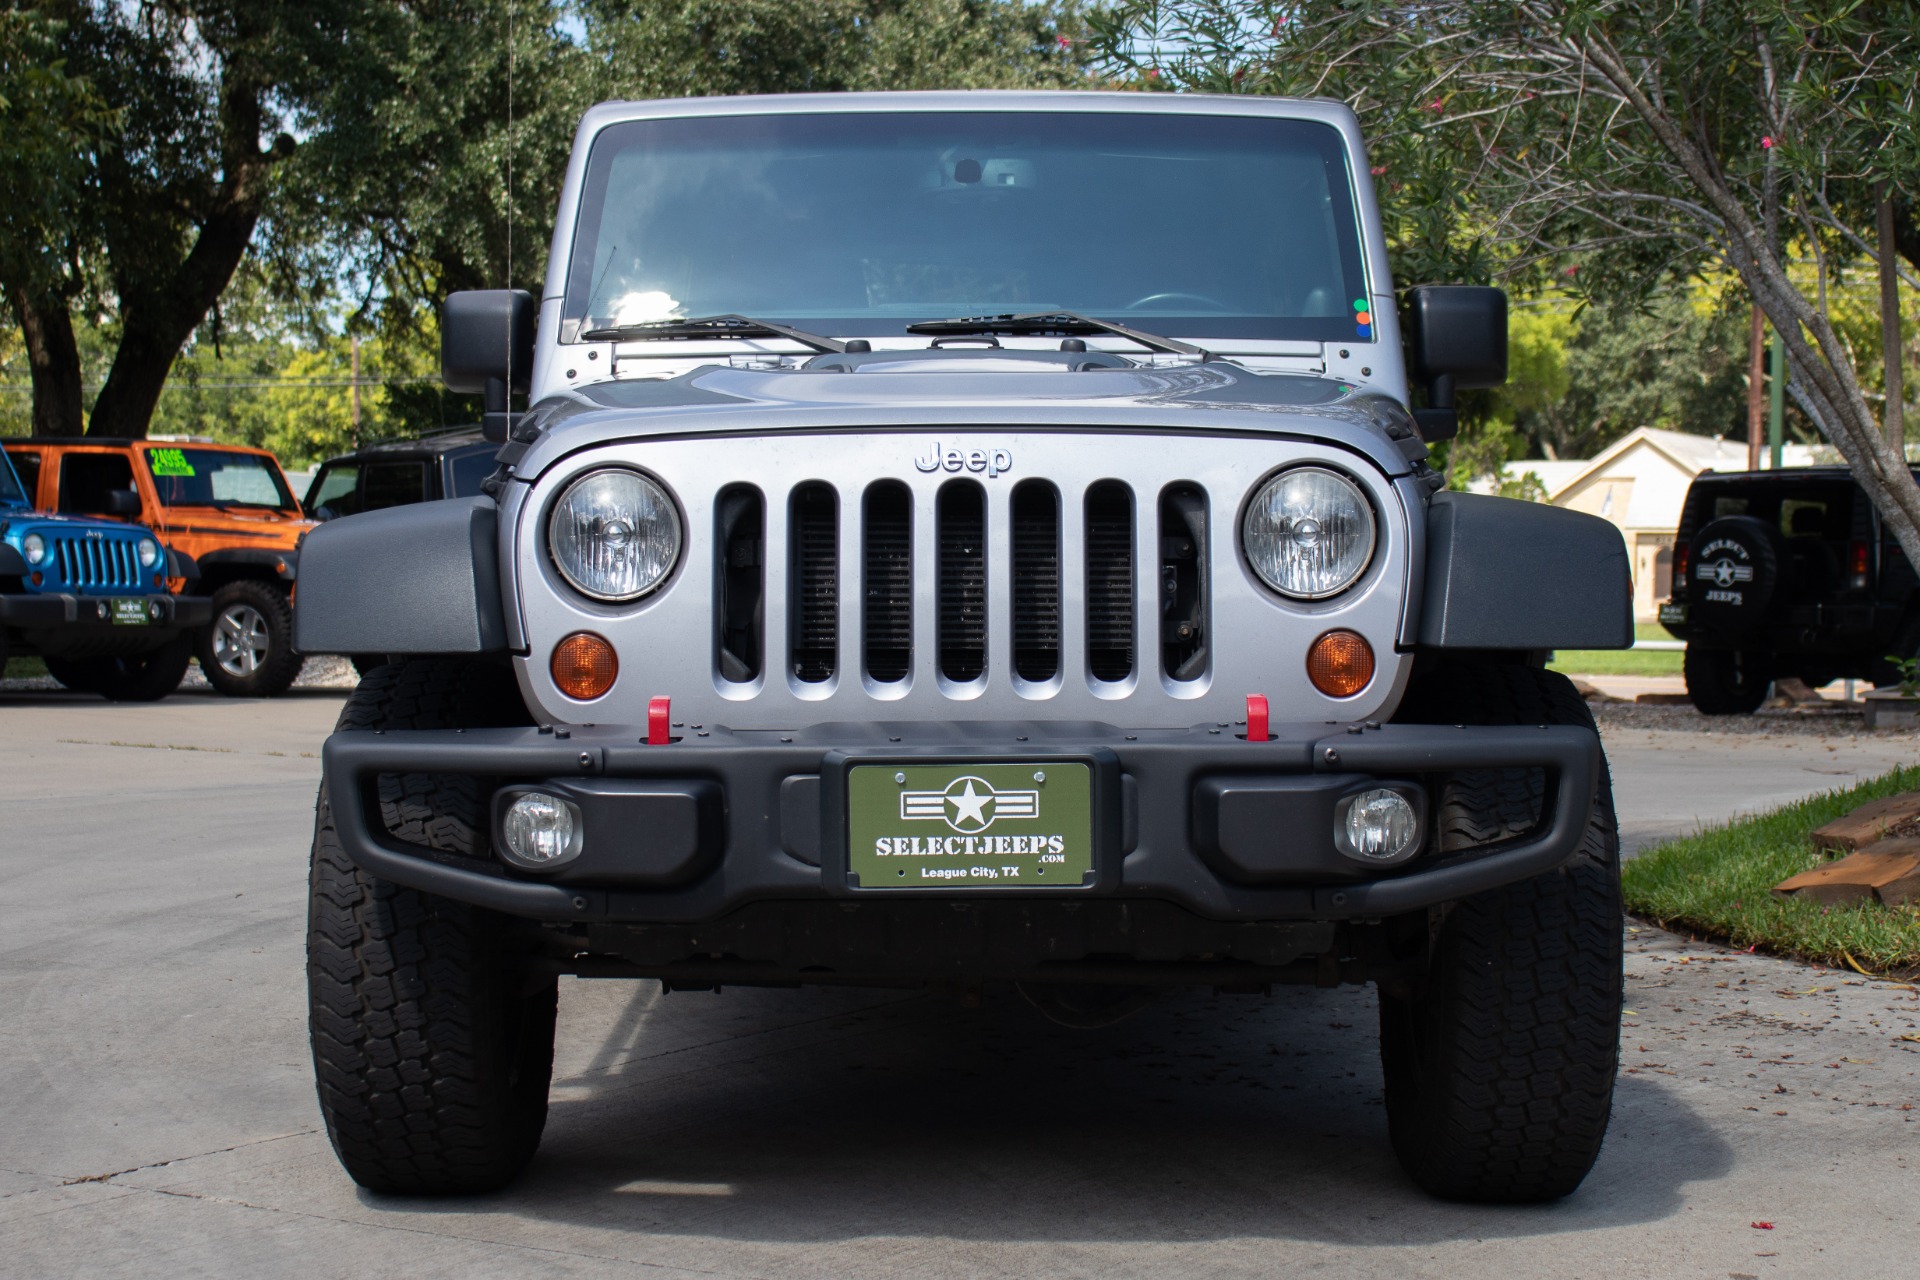 Used-2013-Jeep-Wrangler-Unlimited-10th-Anniversary-Rubicon